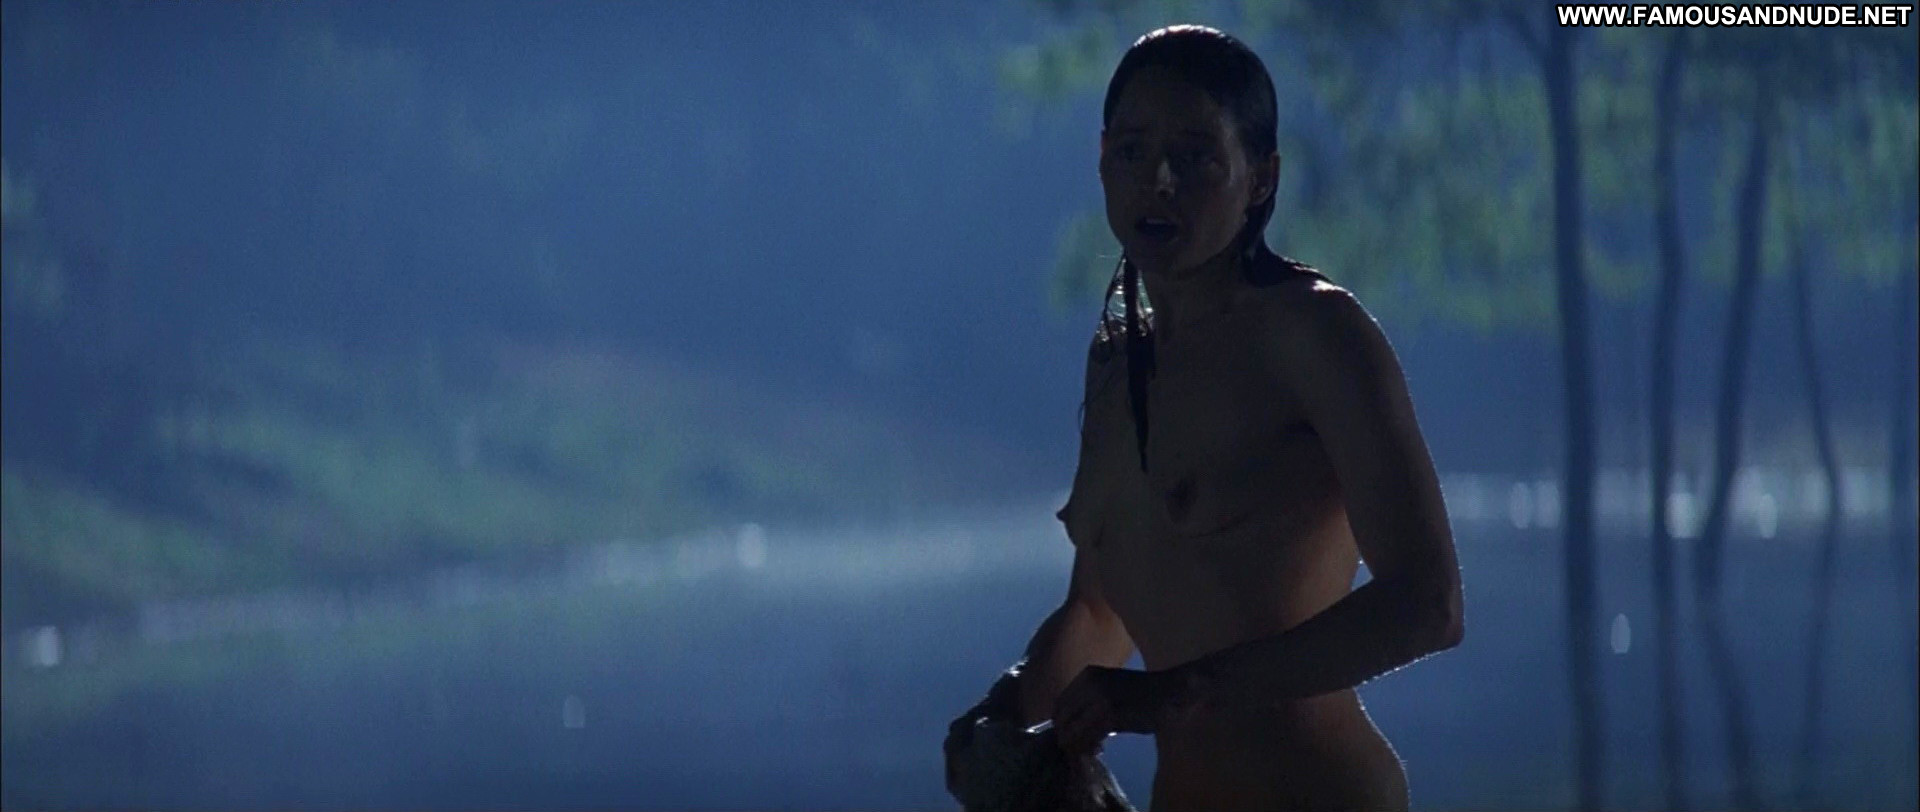 Nell Jodie Foster Hd Celebrity Beautiful Posing Hot Movie Babe Topless.